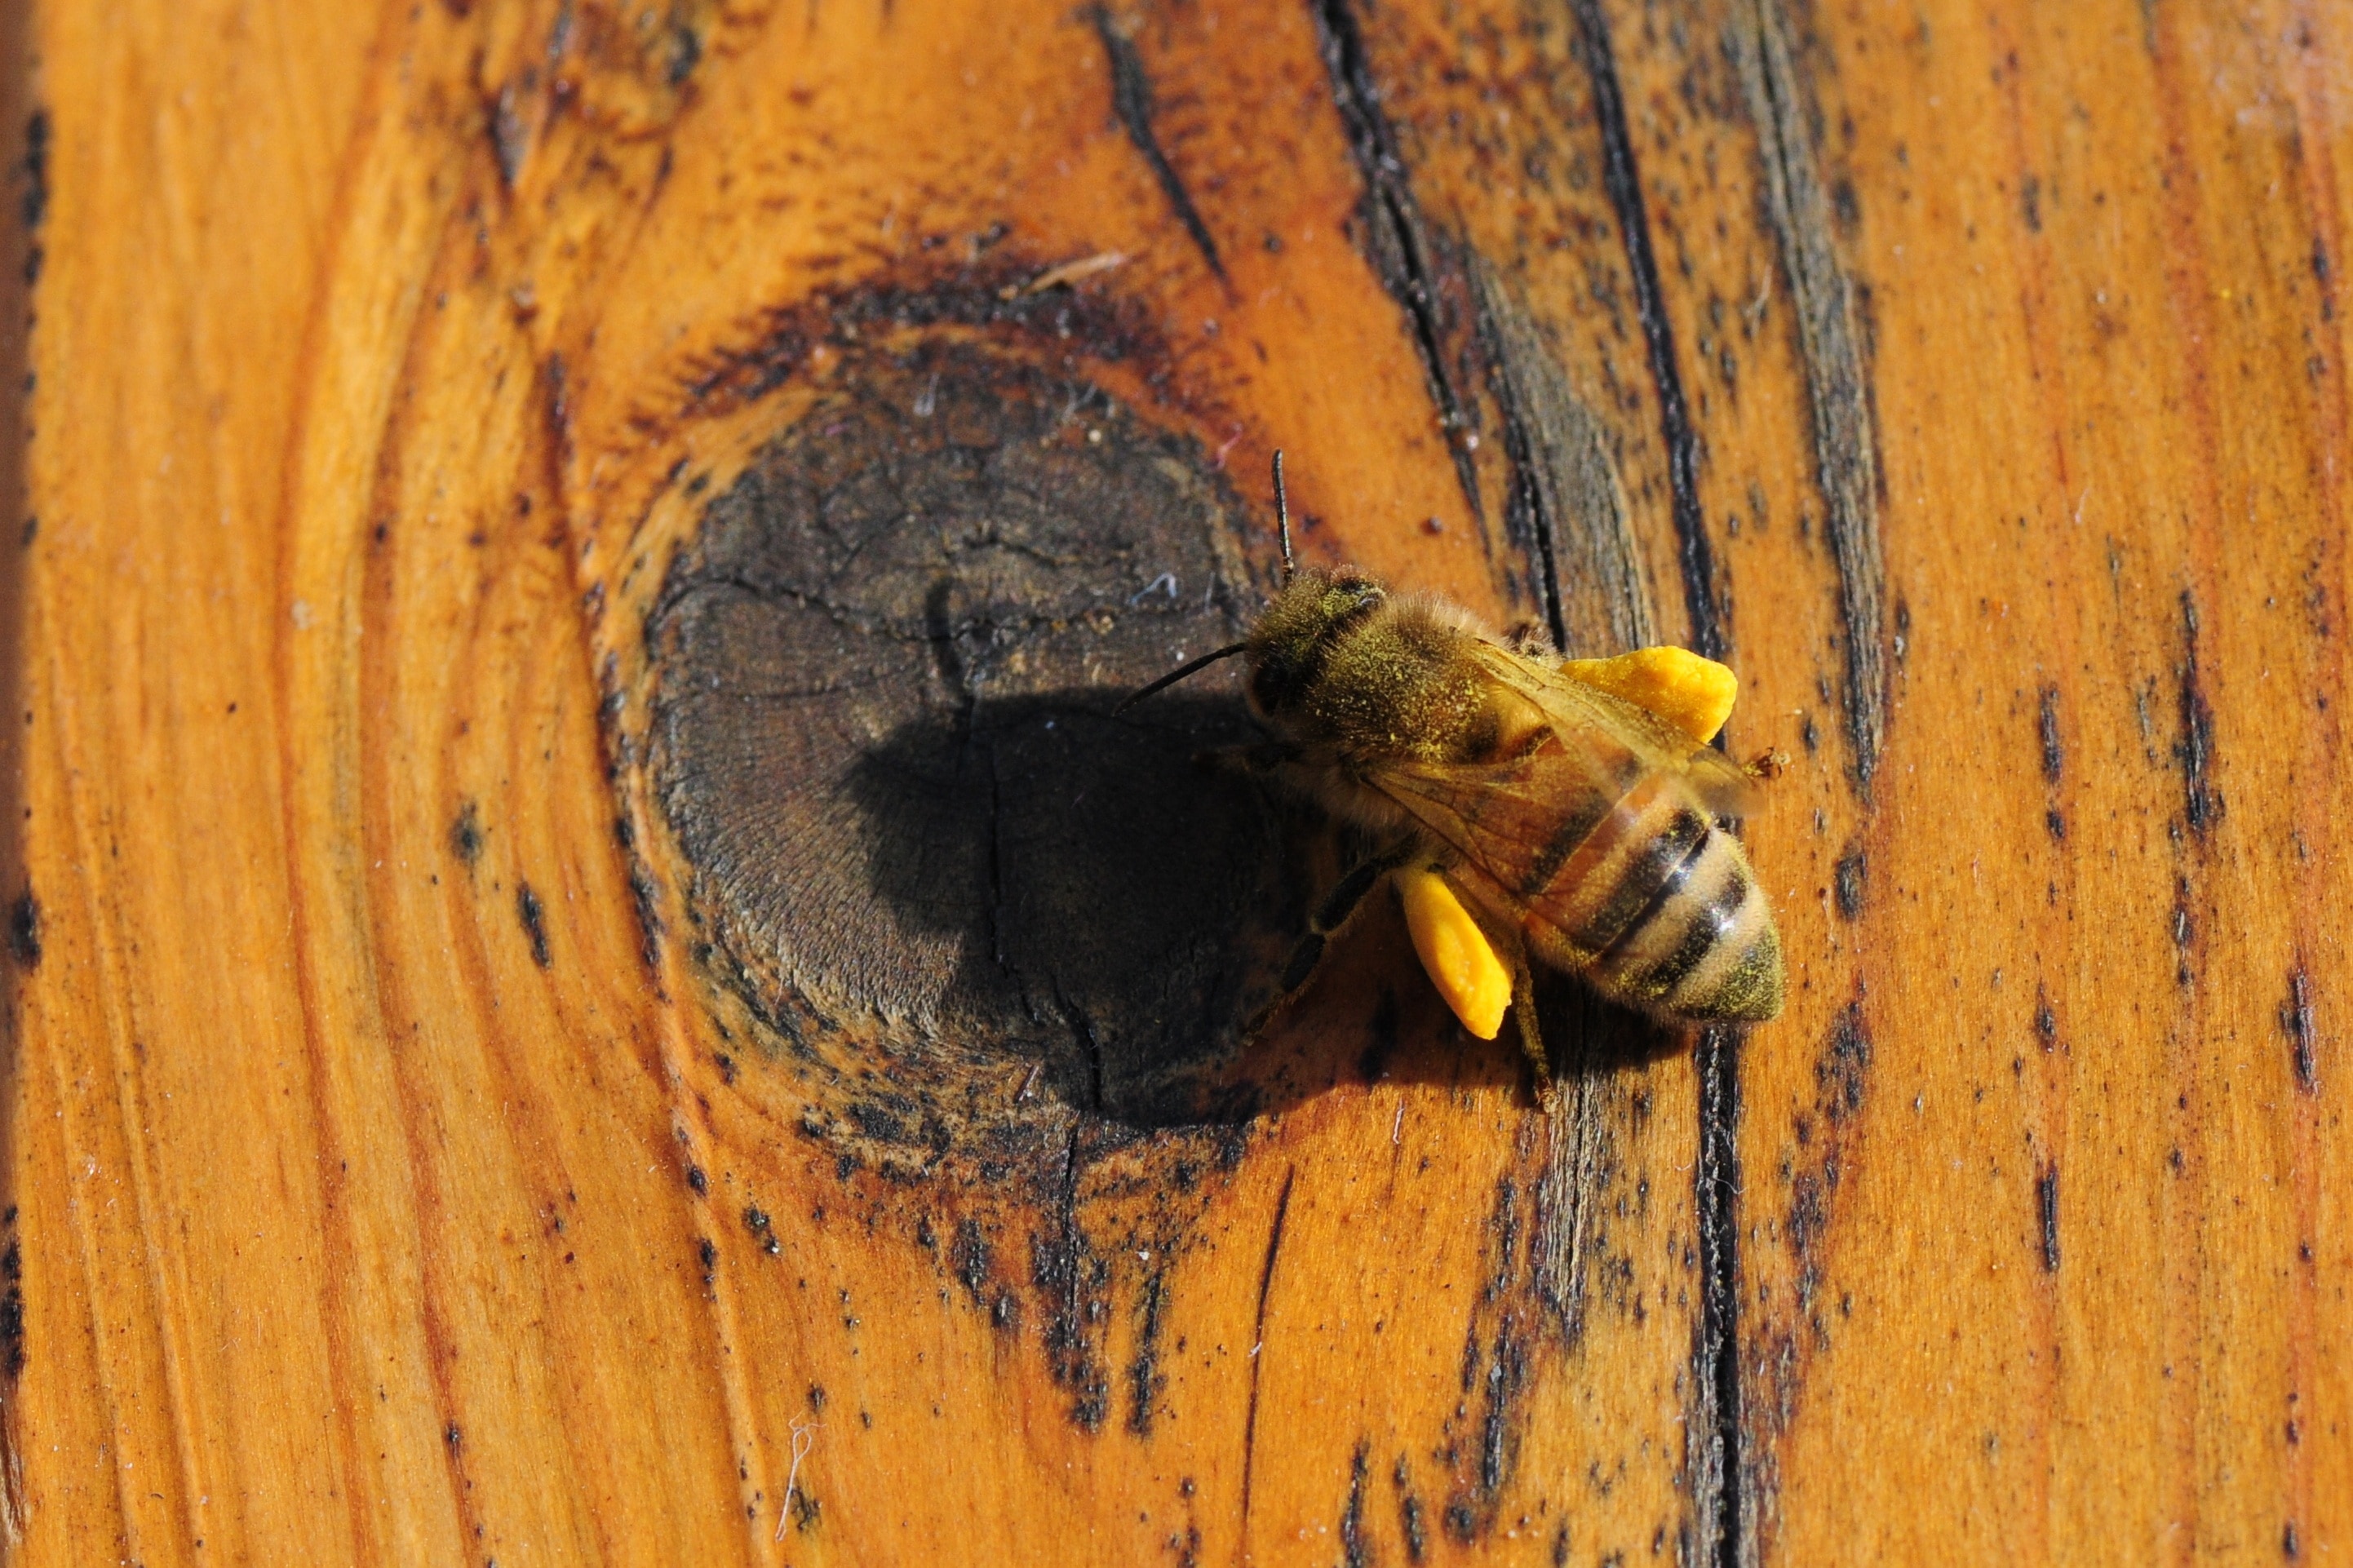 Honey Bee on brown wooden surface